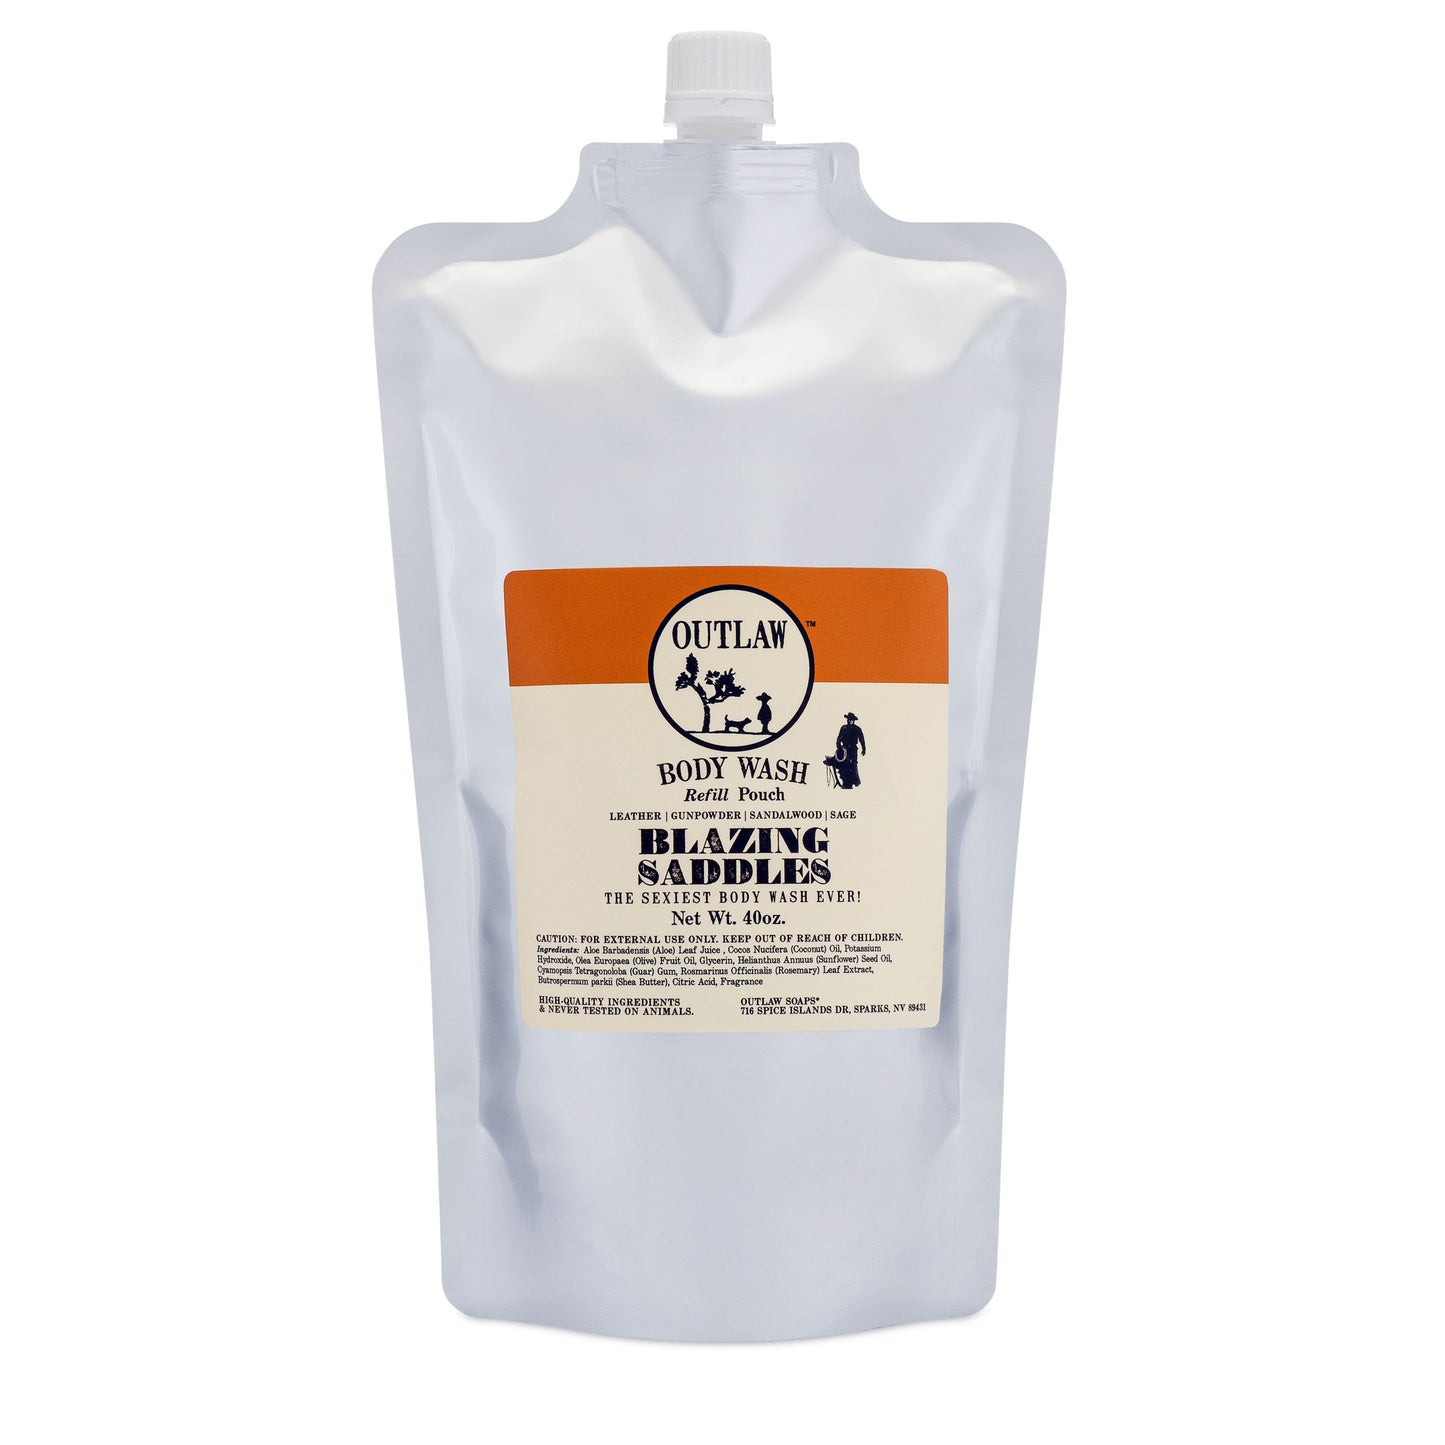 Outlaw Body Wash Refill Pouches